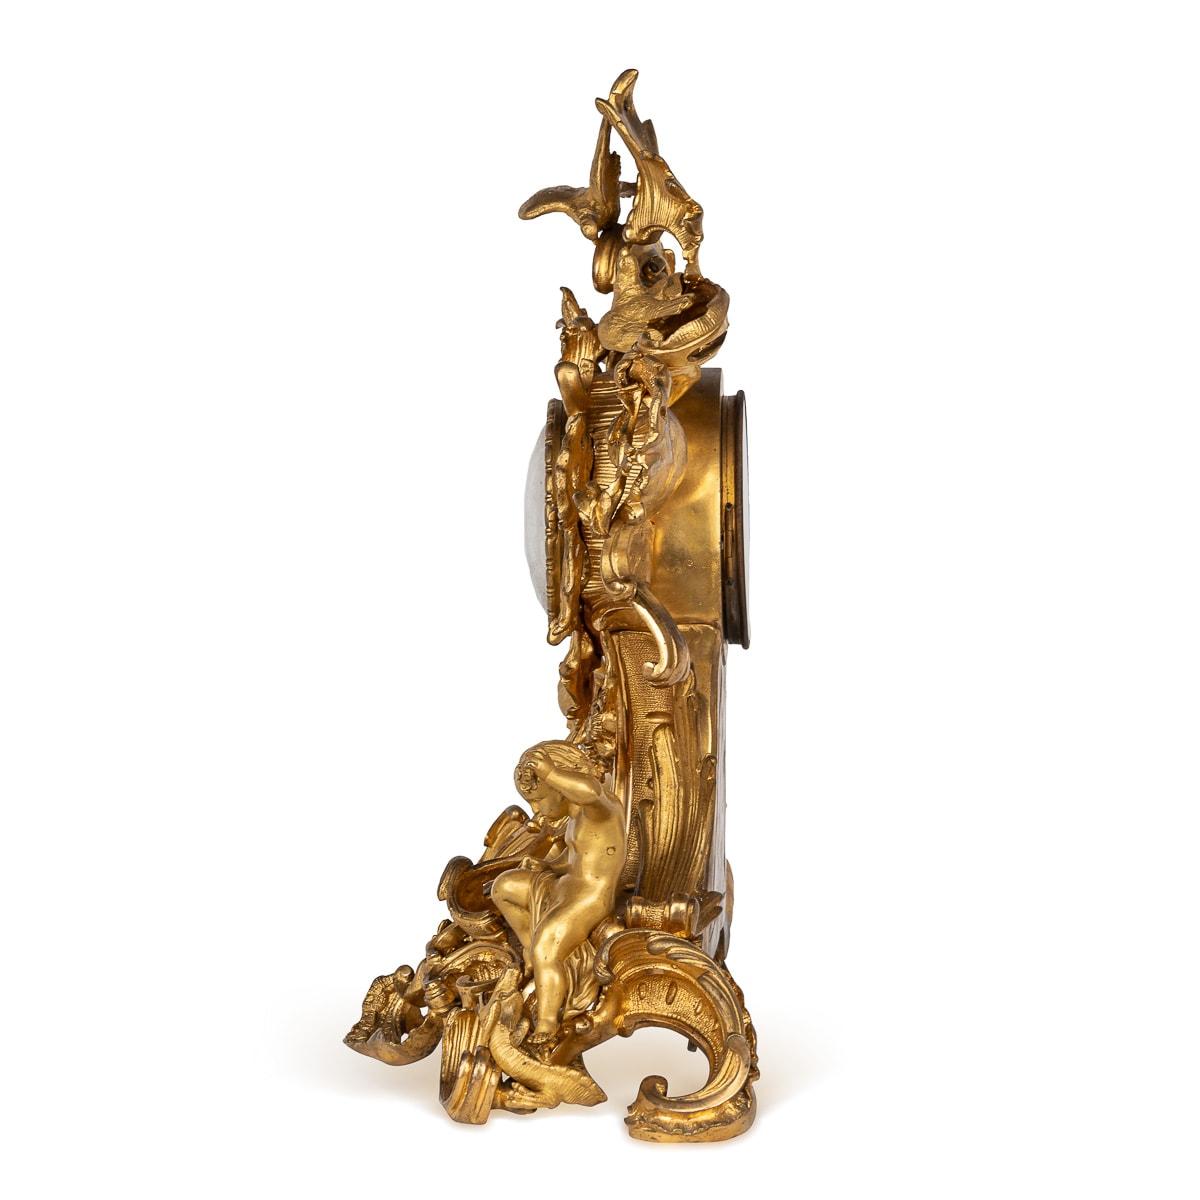 Antiques 19th Century French Rococo-style gilt-bronze mantle clock crafted by Raingo Frères. The clock boasts intricate decoration throughout, with birds resting on floral foliage adorning its surroundings. Flanking the central column on the base